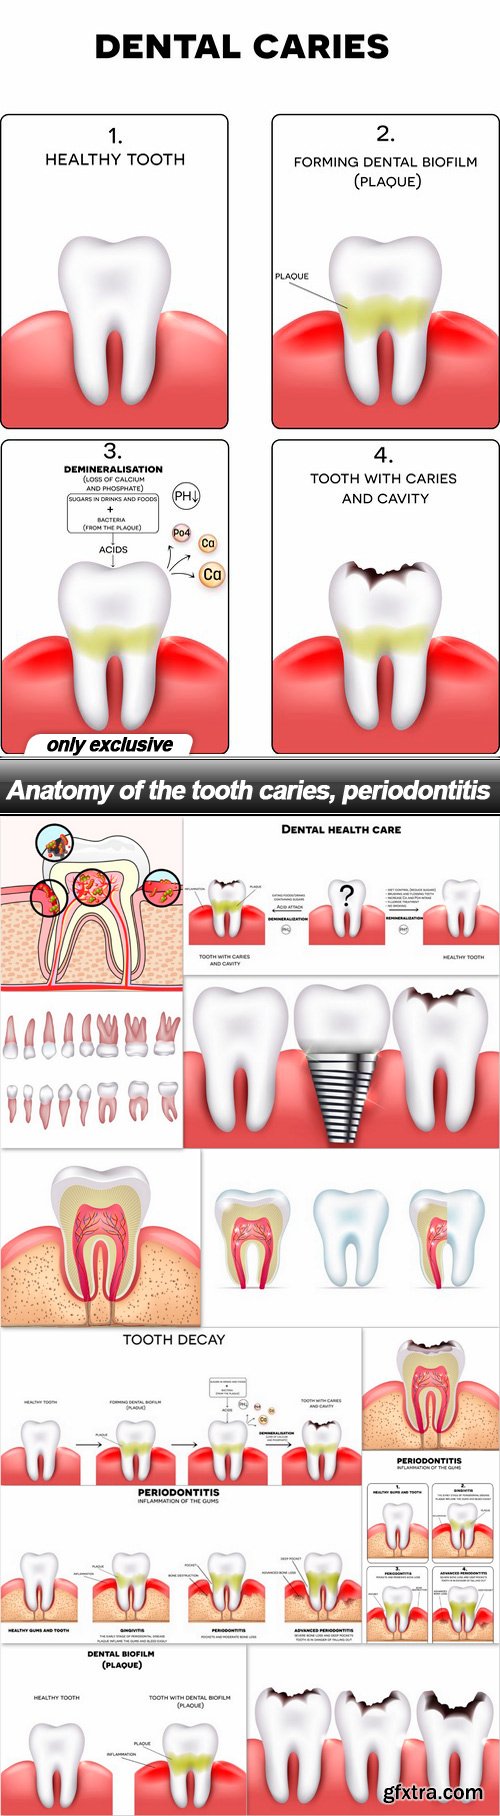 Anatomy of the tooth caries, periodontitis - 13 EPS